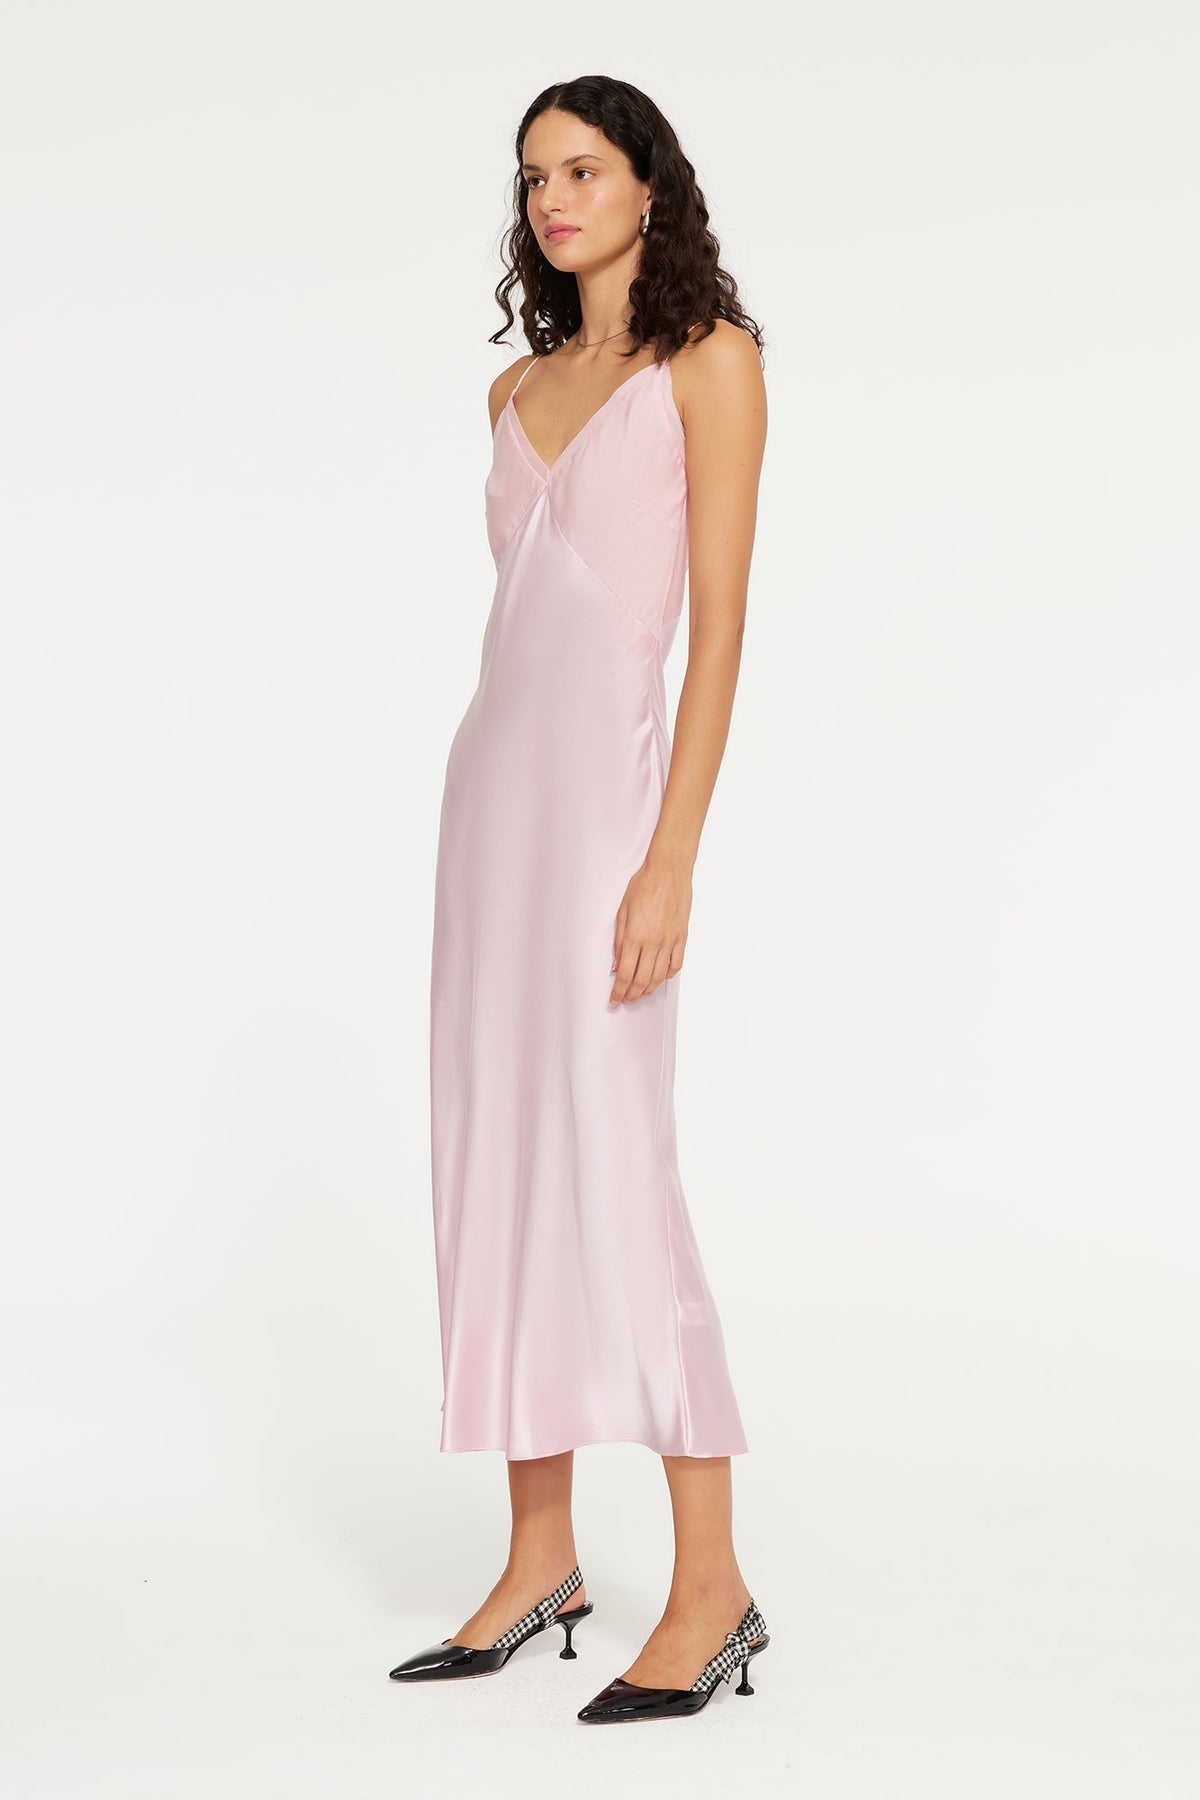 The Eclipse Maxi Dress By GINIA In Candy Pink